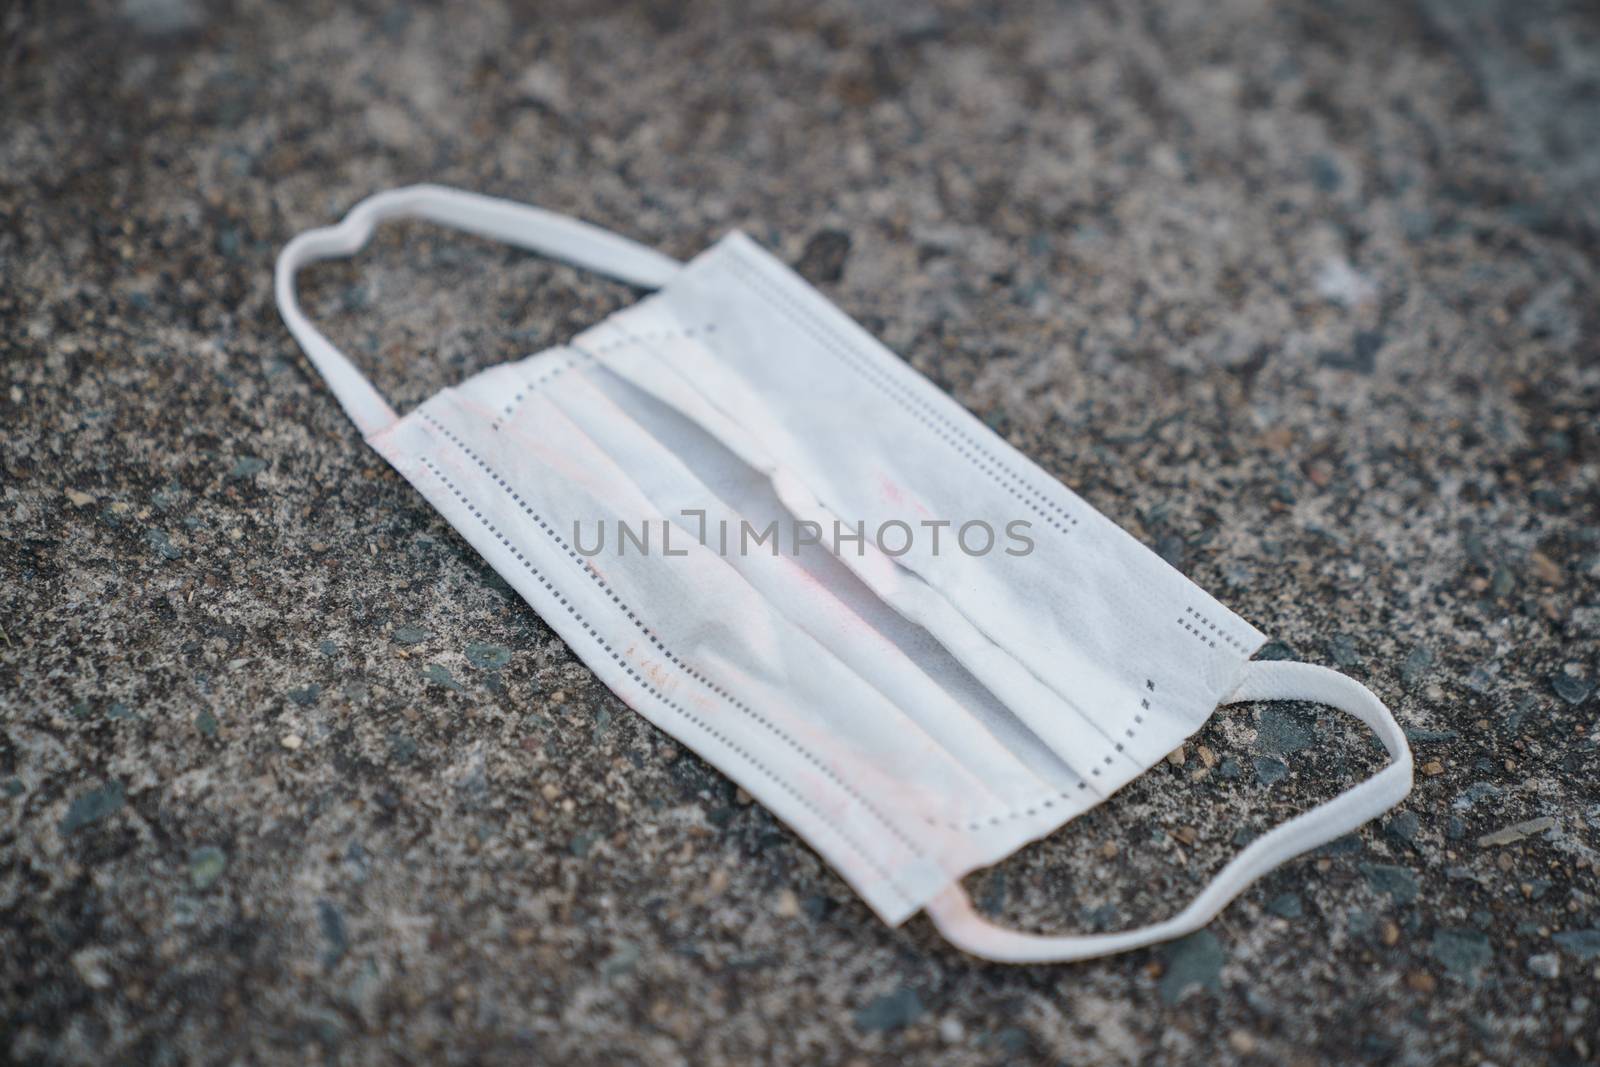 Used dirty face surgical mask dropped on the ground, selective focus center mask